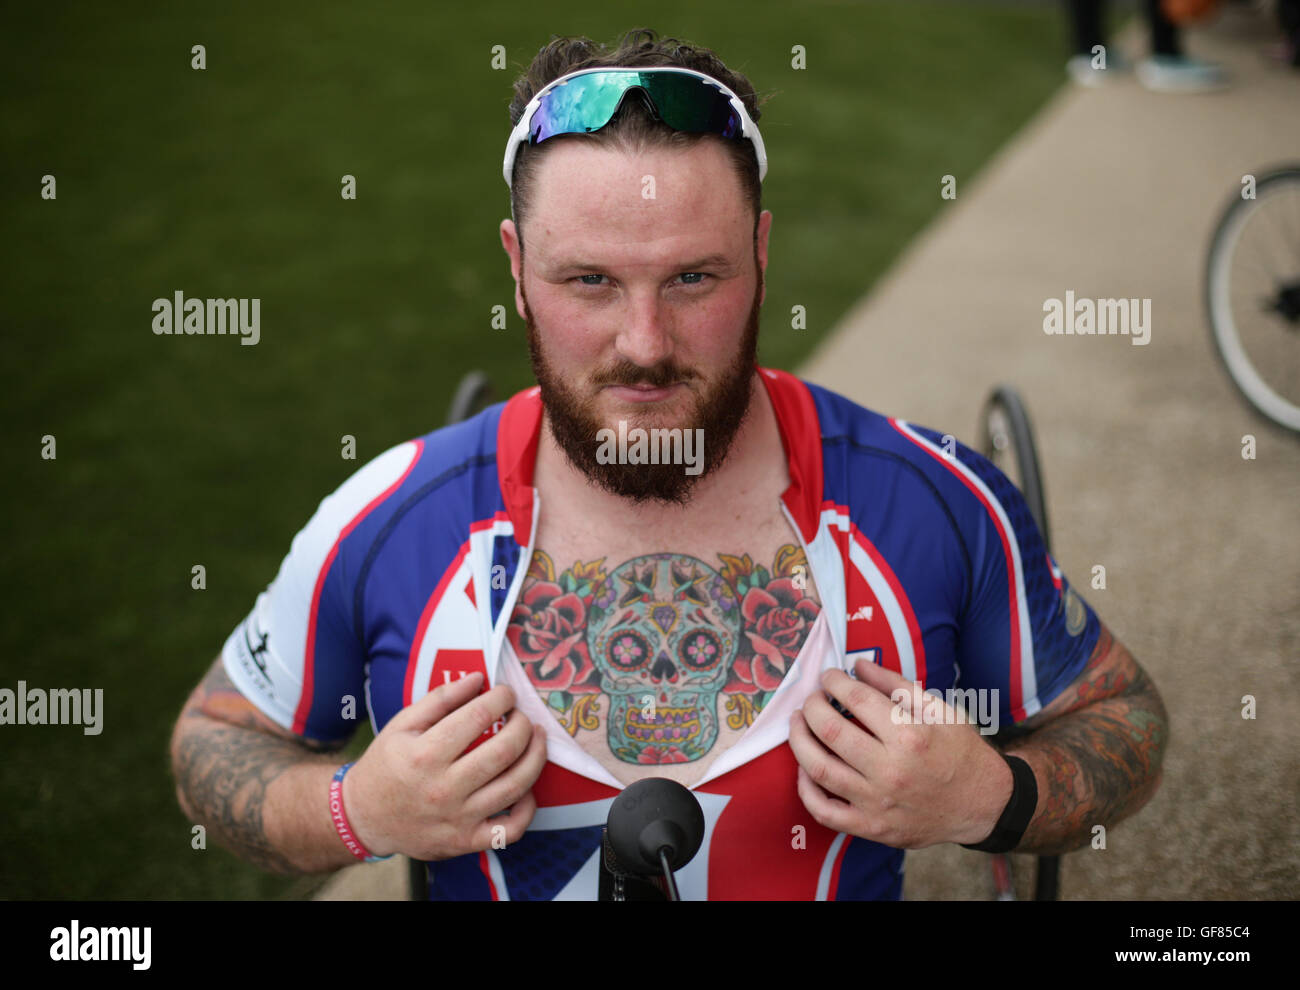 Competitor Clive Smith shows off his chest tattoo during the Prudential RideLondon Grand Prix at the Lee Valley VeloPark, Queen Elizabeth Olympic Park, in London. Stock Photo